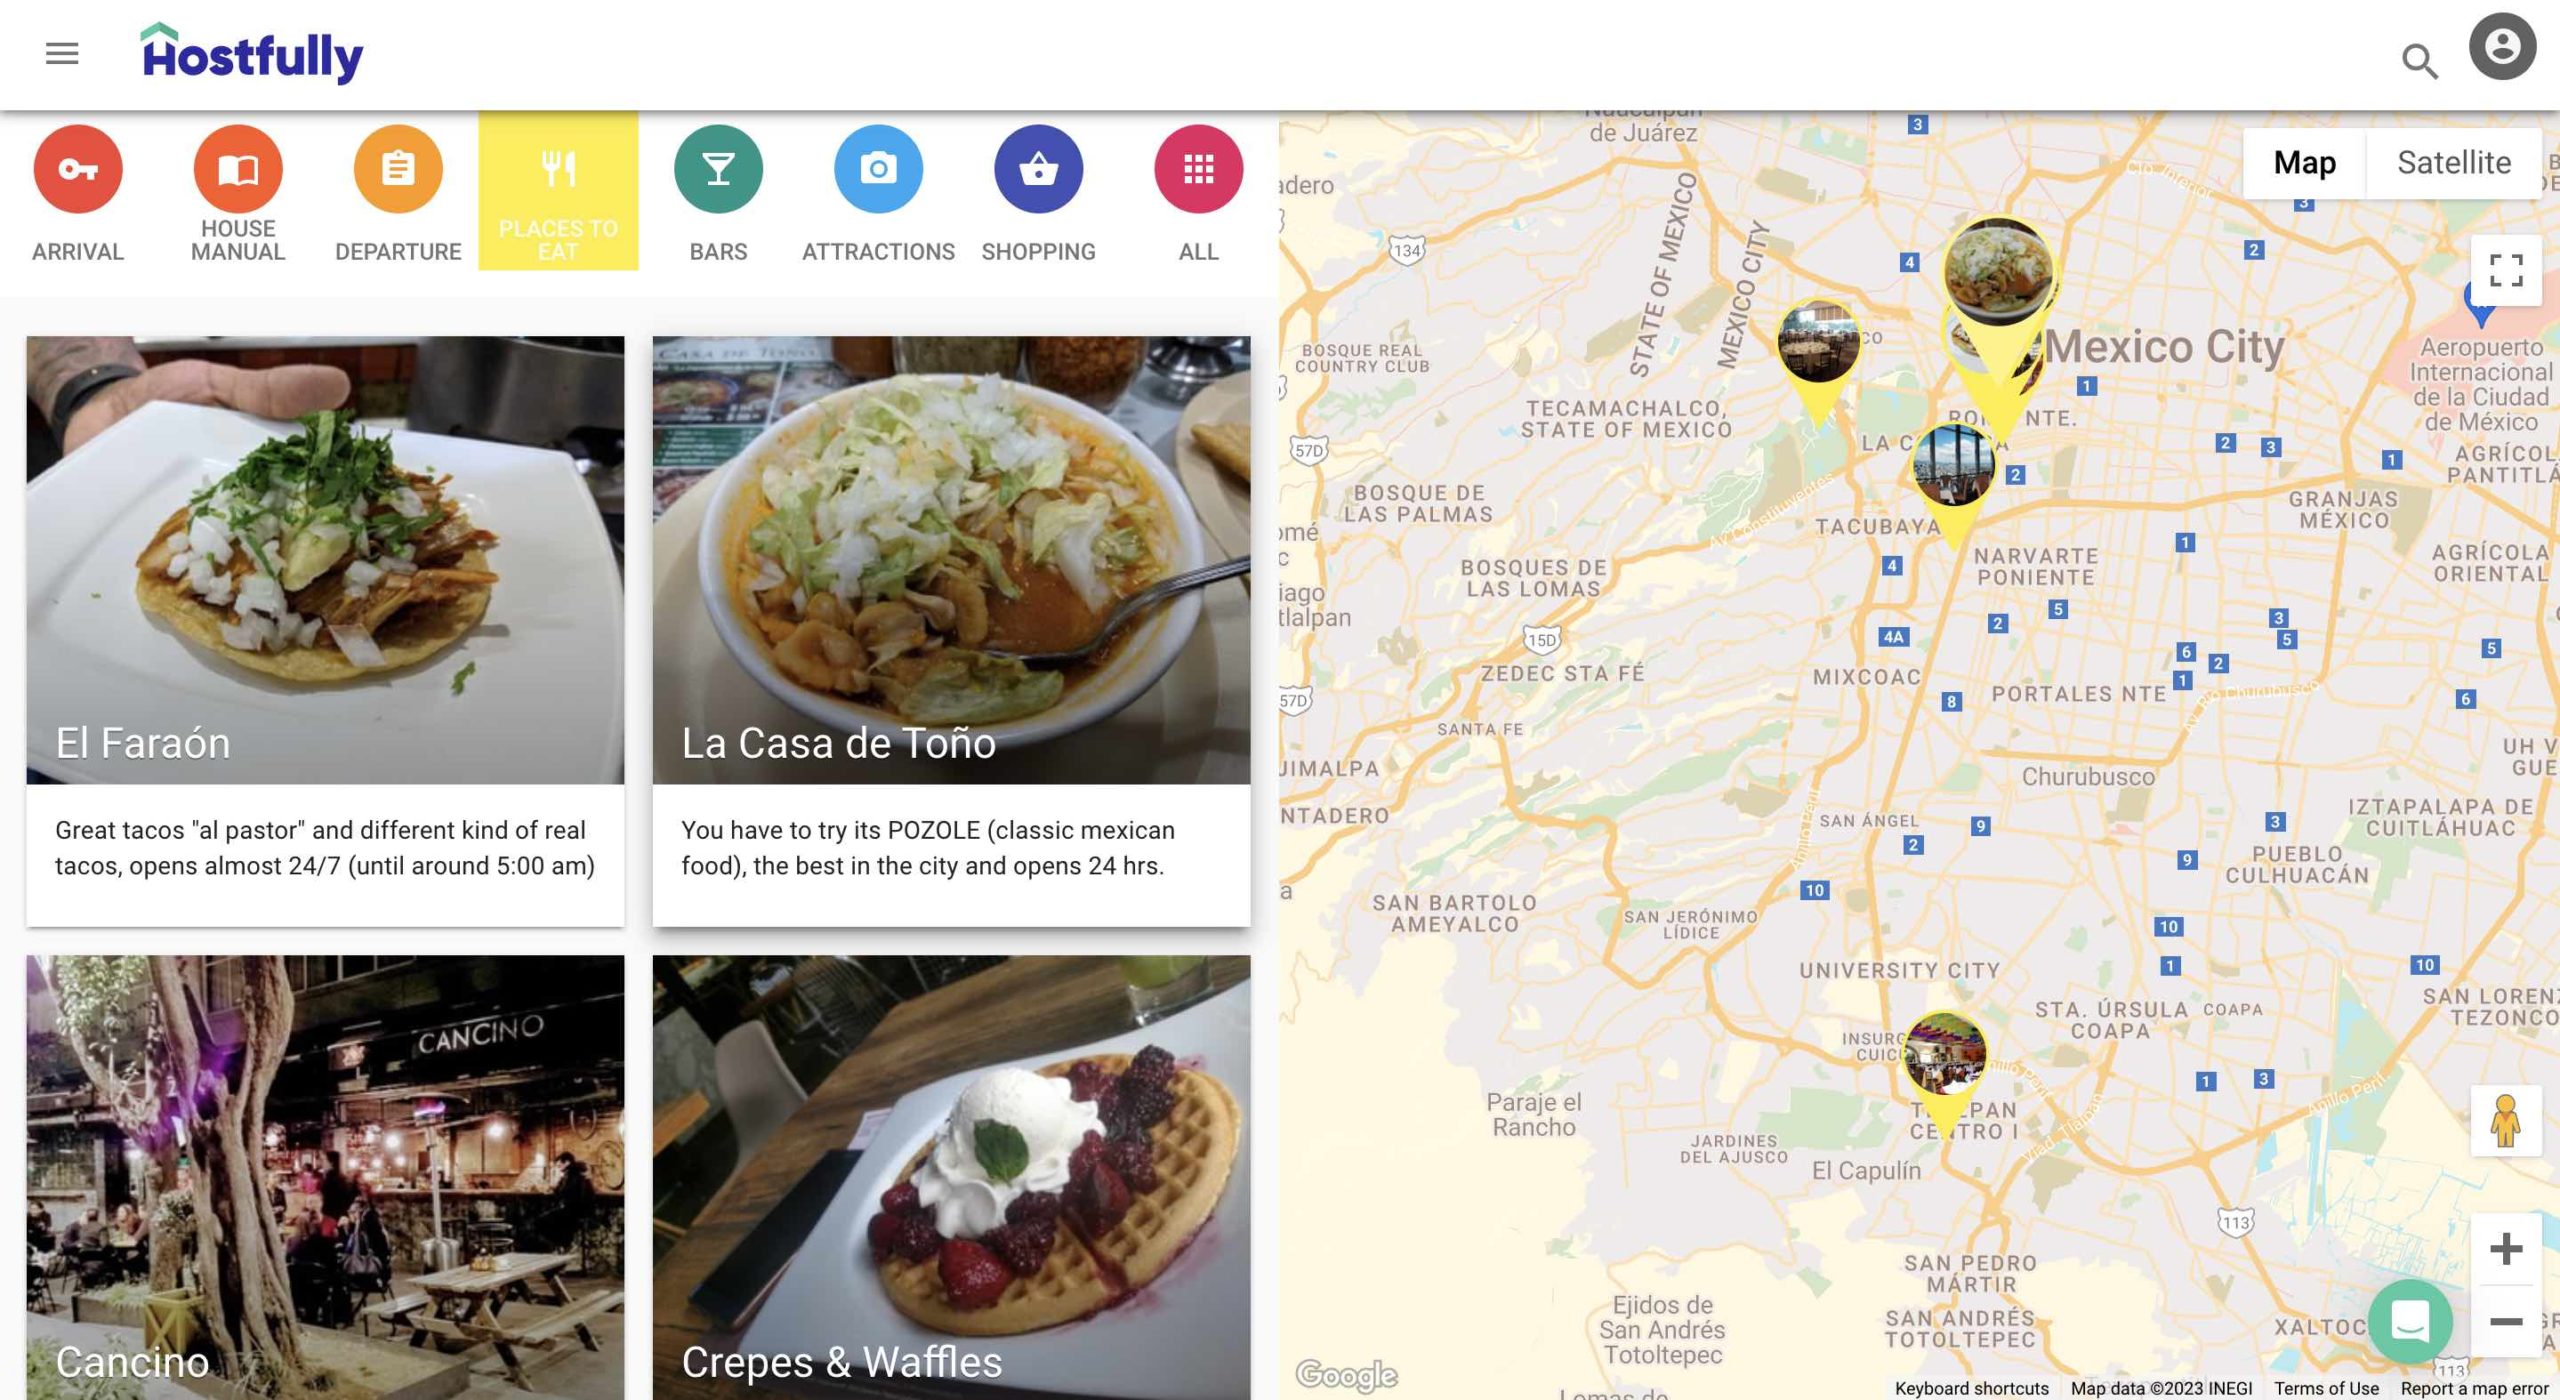 Hostfully Digital Guidebook showing local dining recommendations